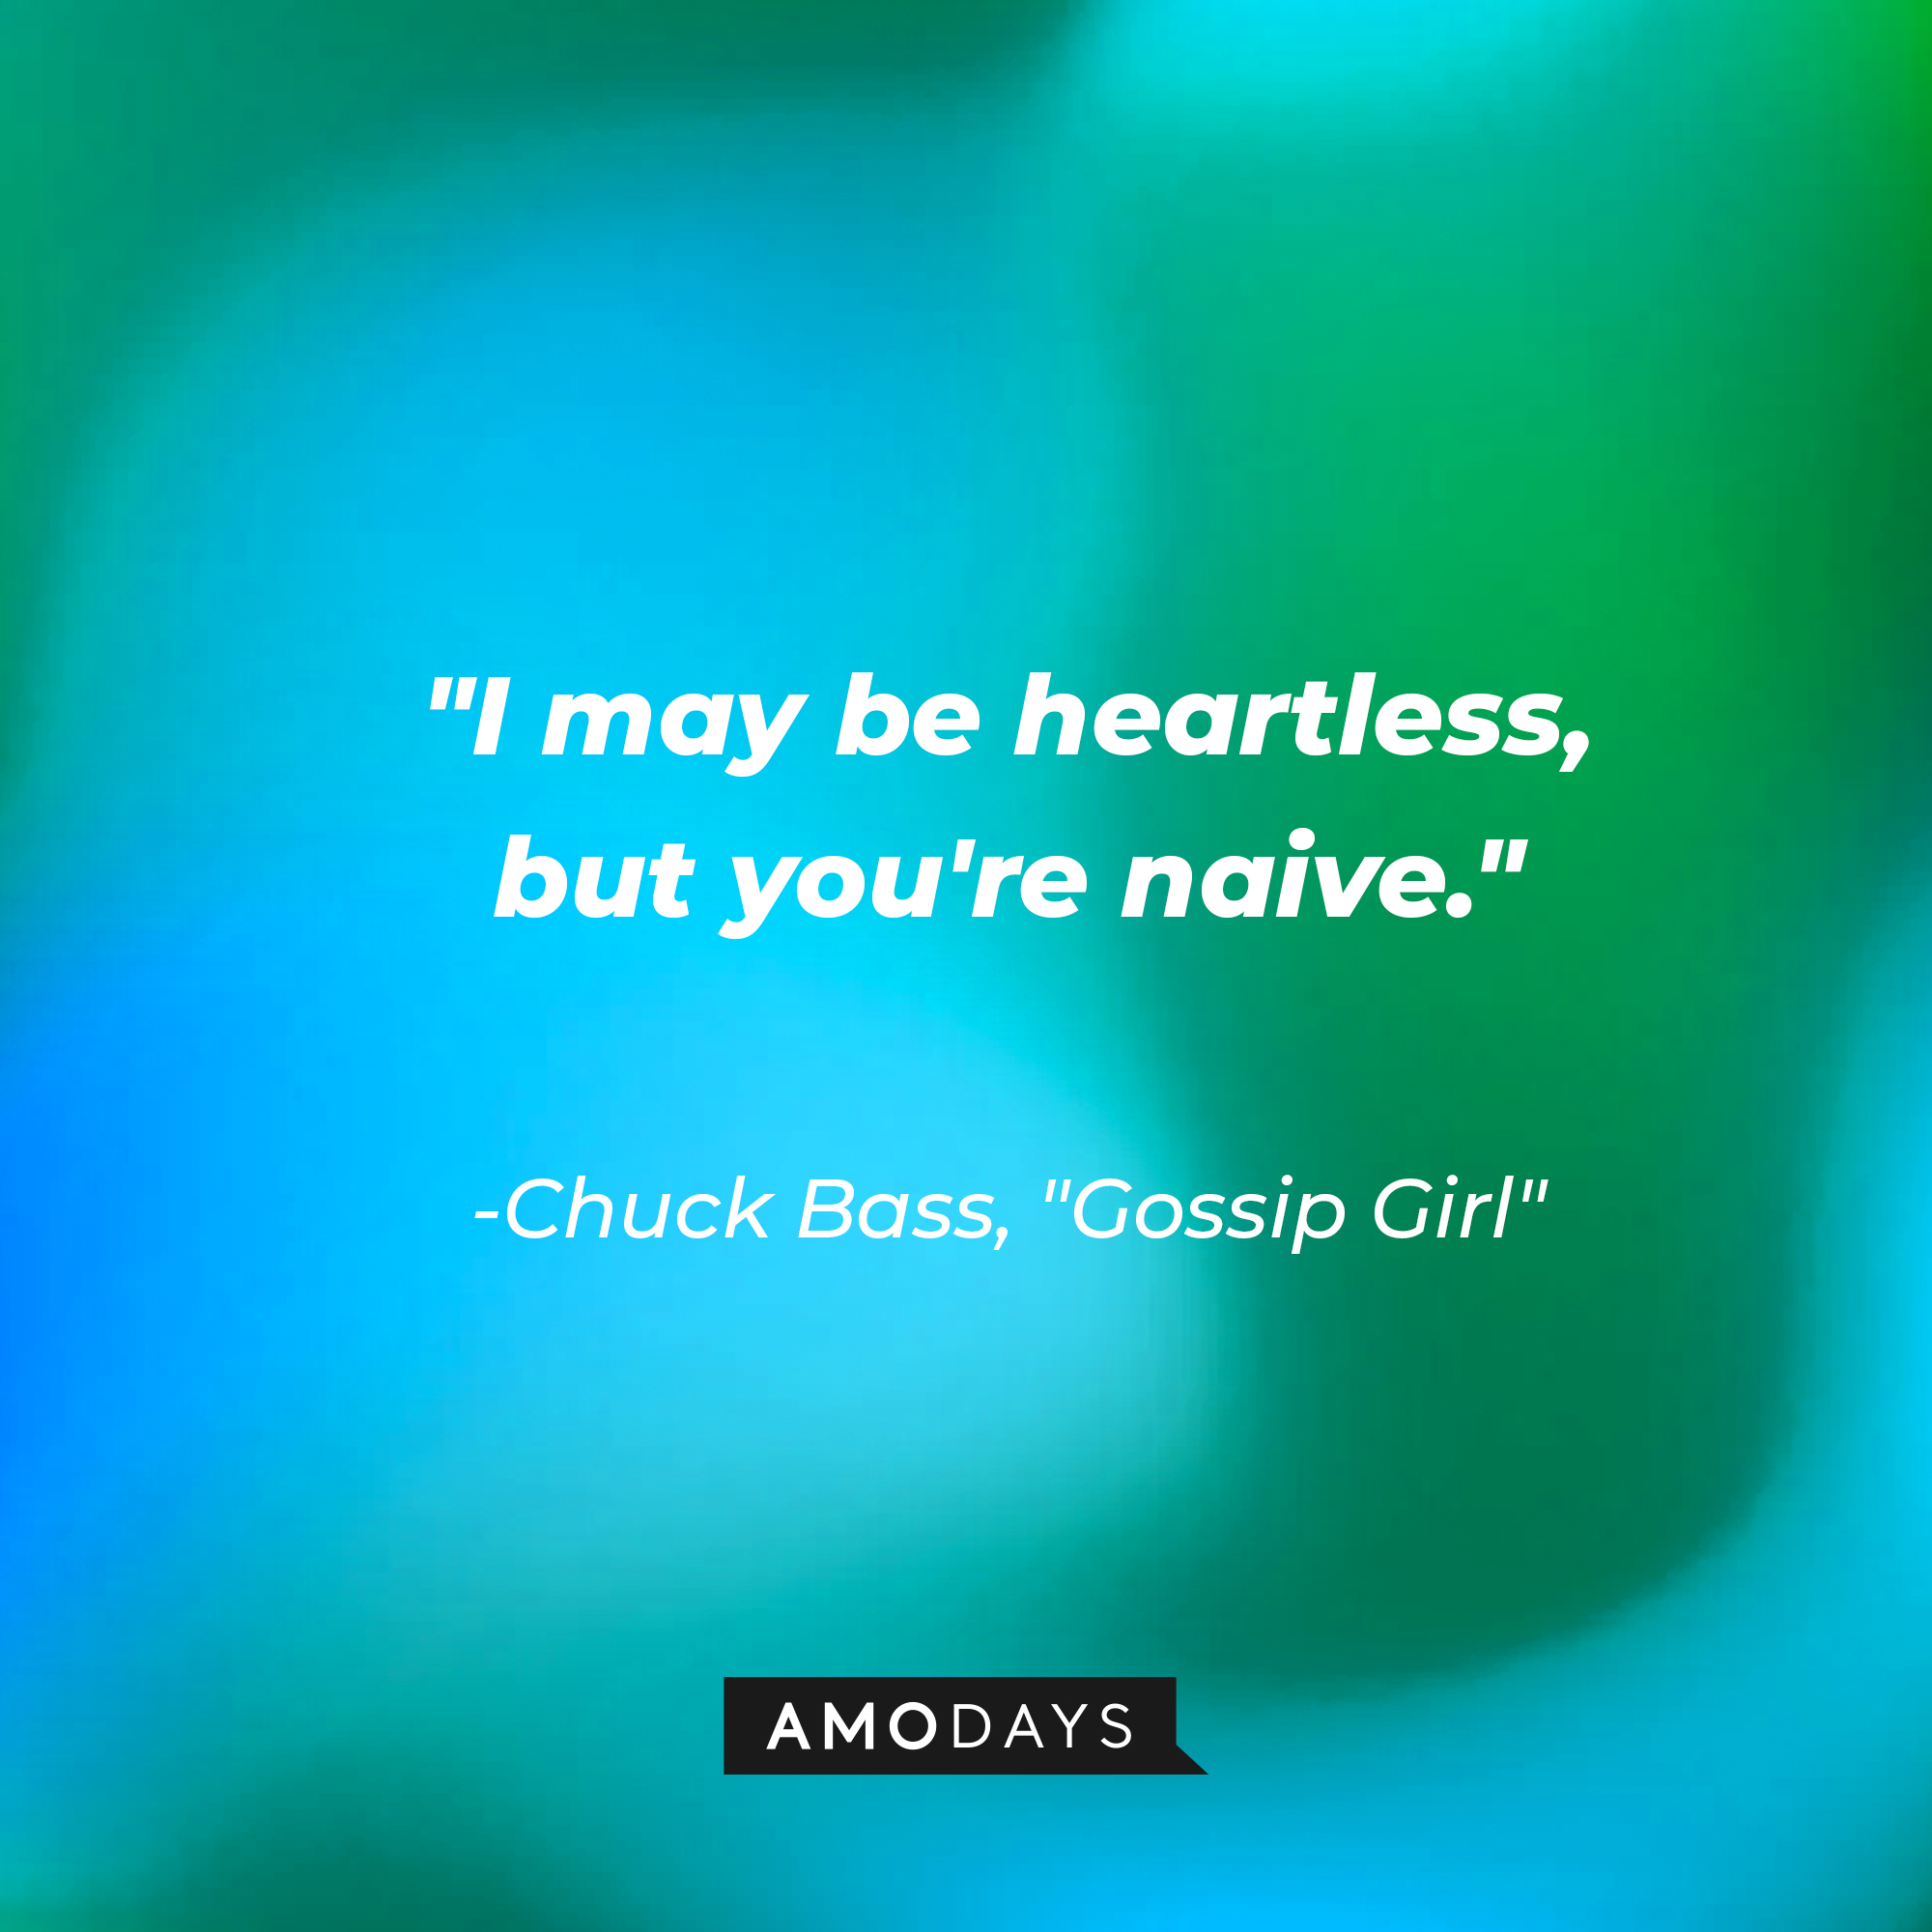 Chuck Bass' quote: "I may be heartless, but you're naive." | Source: AmoDays